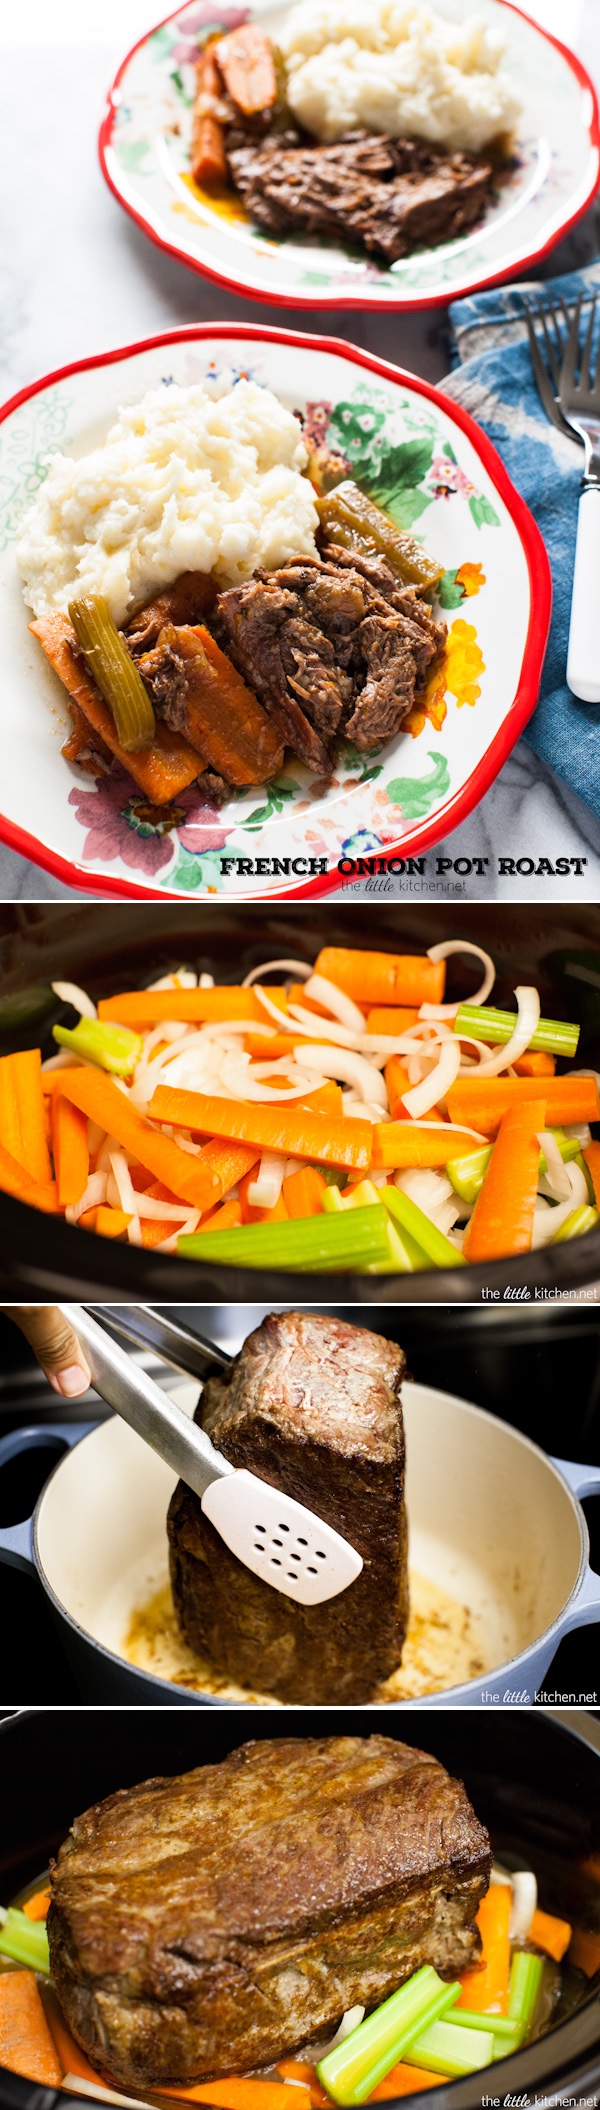 So easy to make and the whole family will enjoy! French Onion Pot Roast (Slow Cooker Recipe) from thelittlekitchen.net